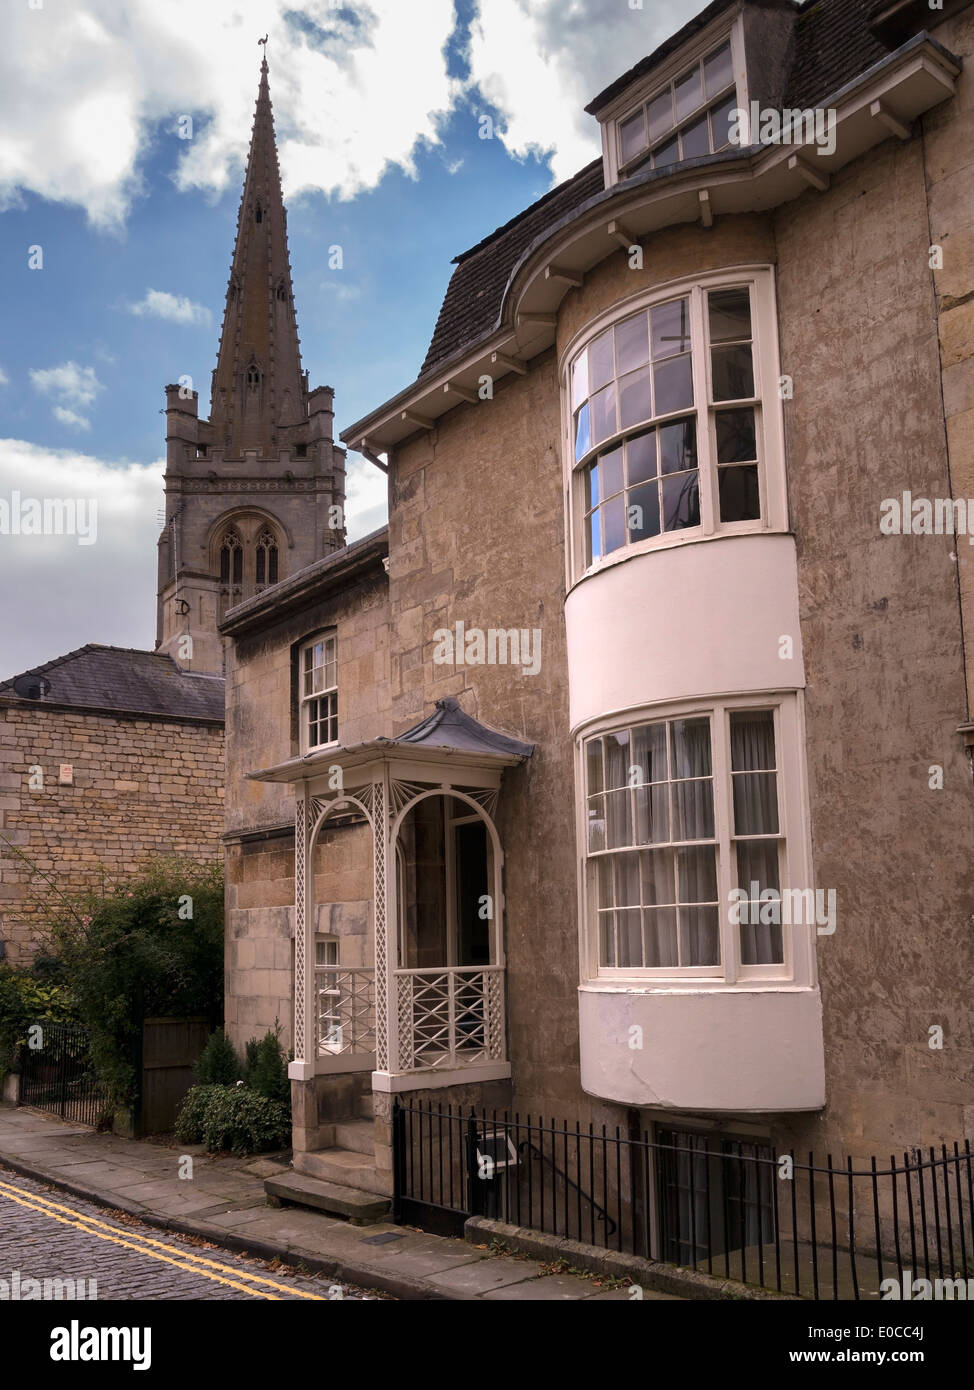 Old stone building with ornate porch and curved sash bay window and church tower beyond, Stamford, Lincolnshire, England, UK Stock Photo